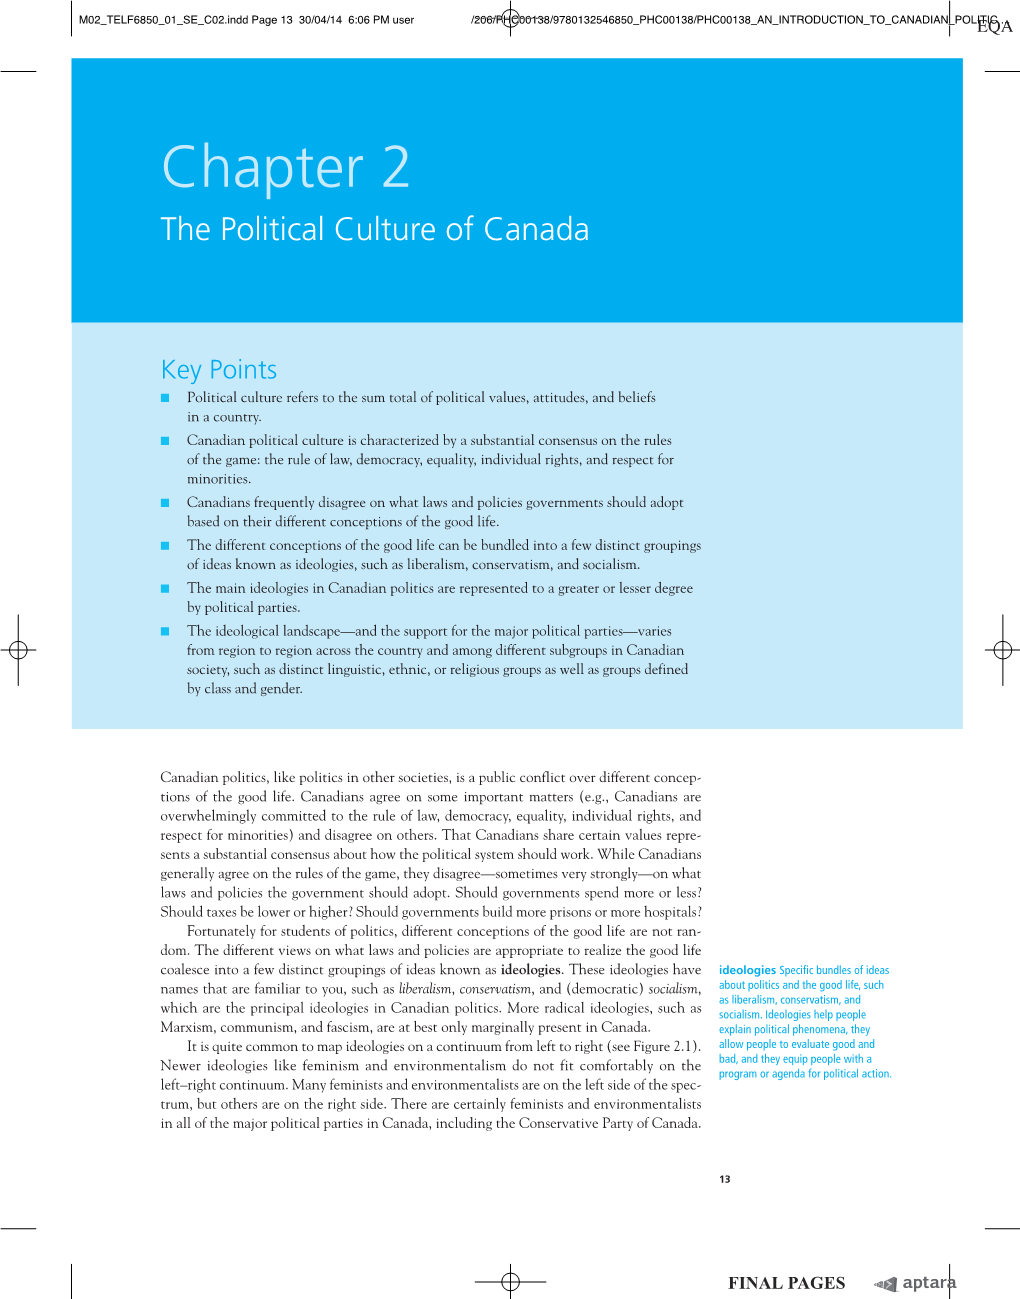 Chapter 2 the Political Culture of Canada